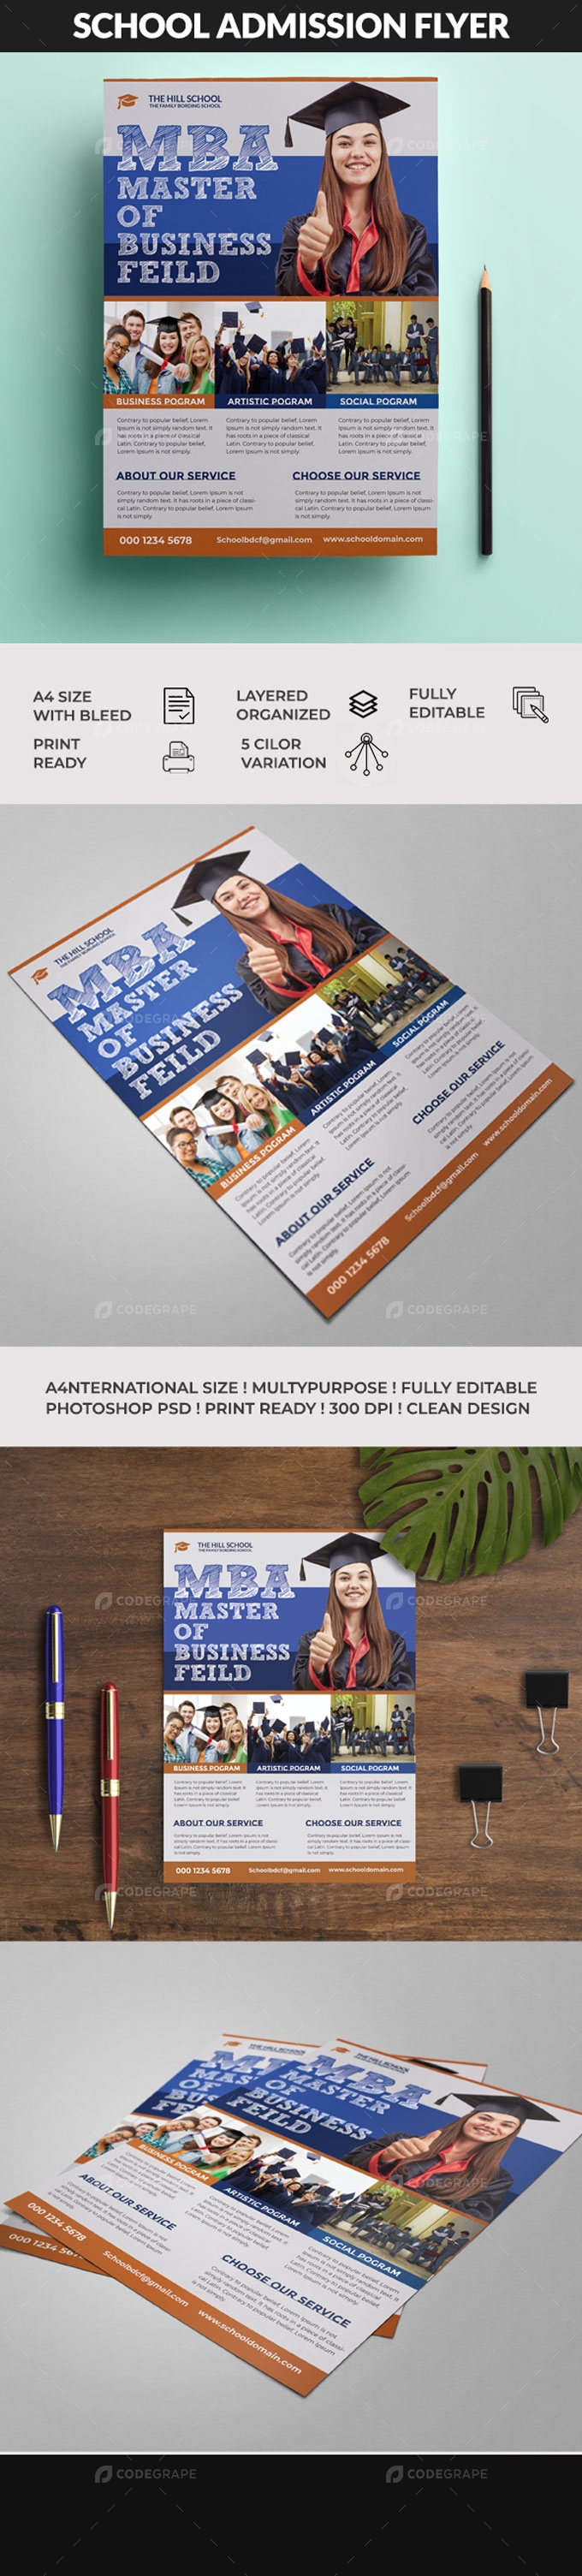 School Admission Flyer Template